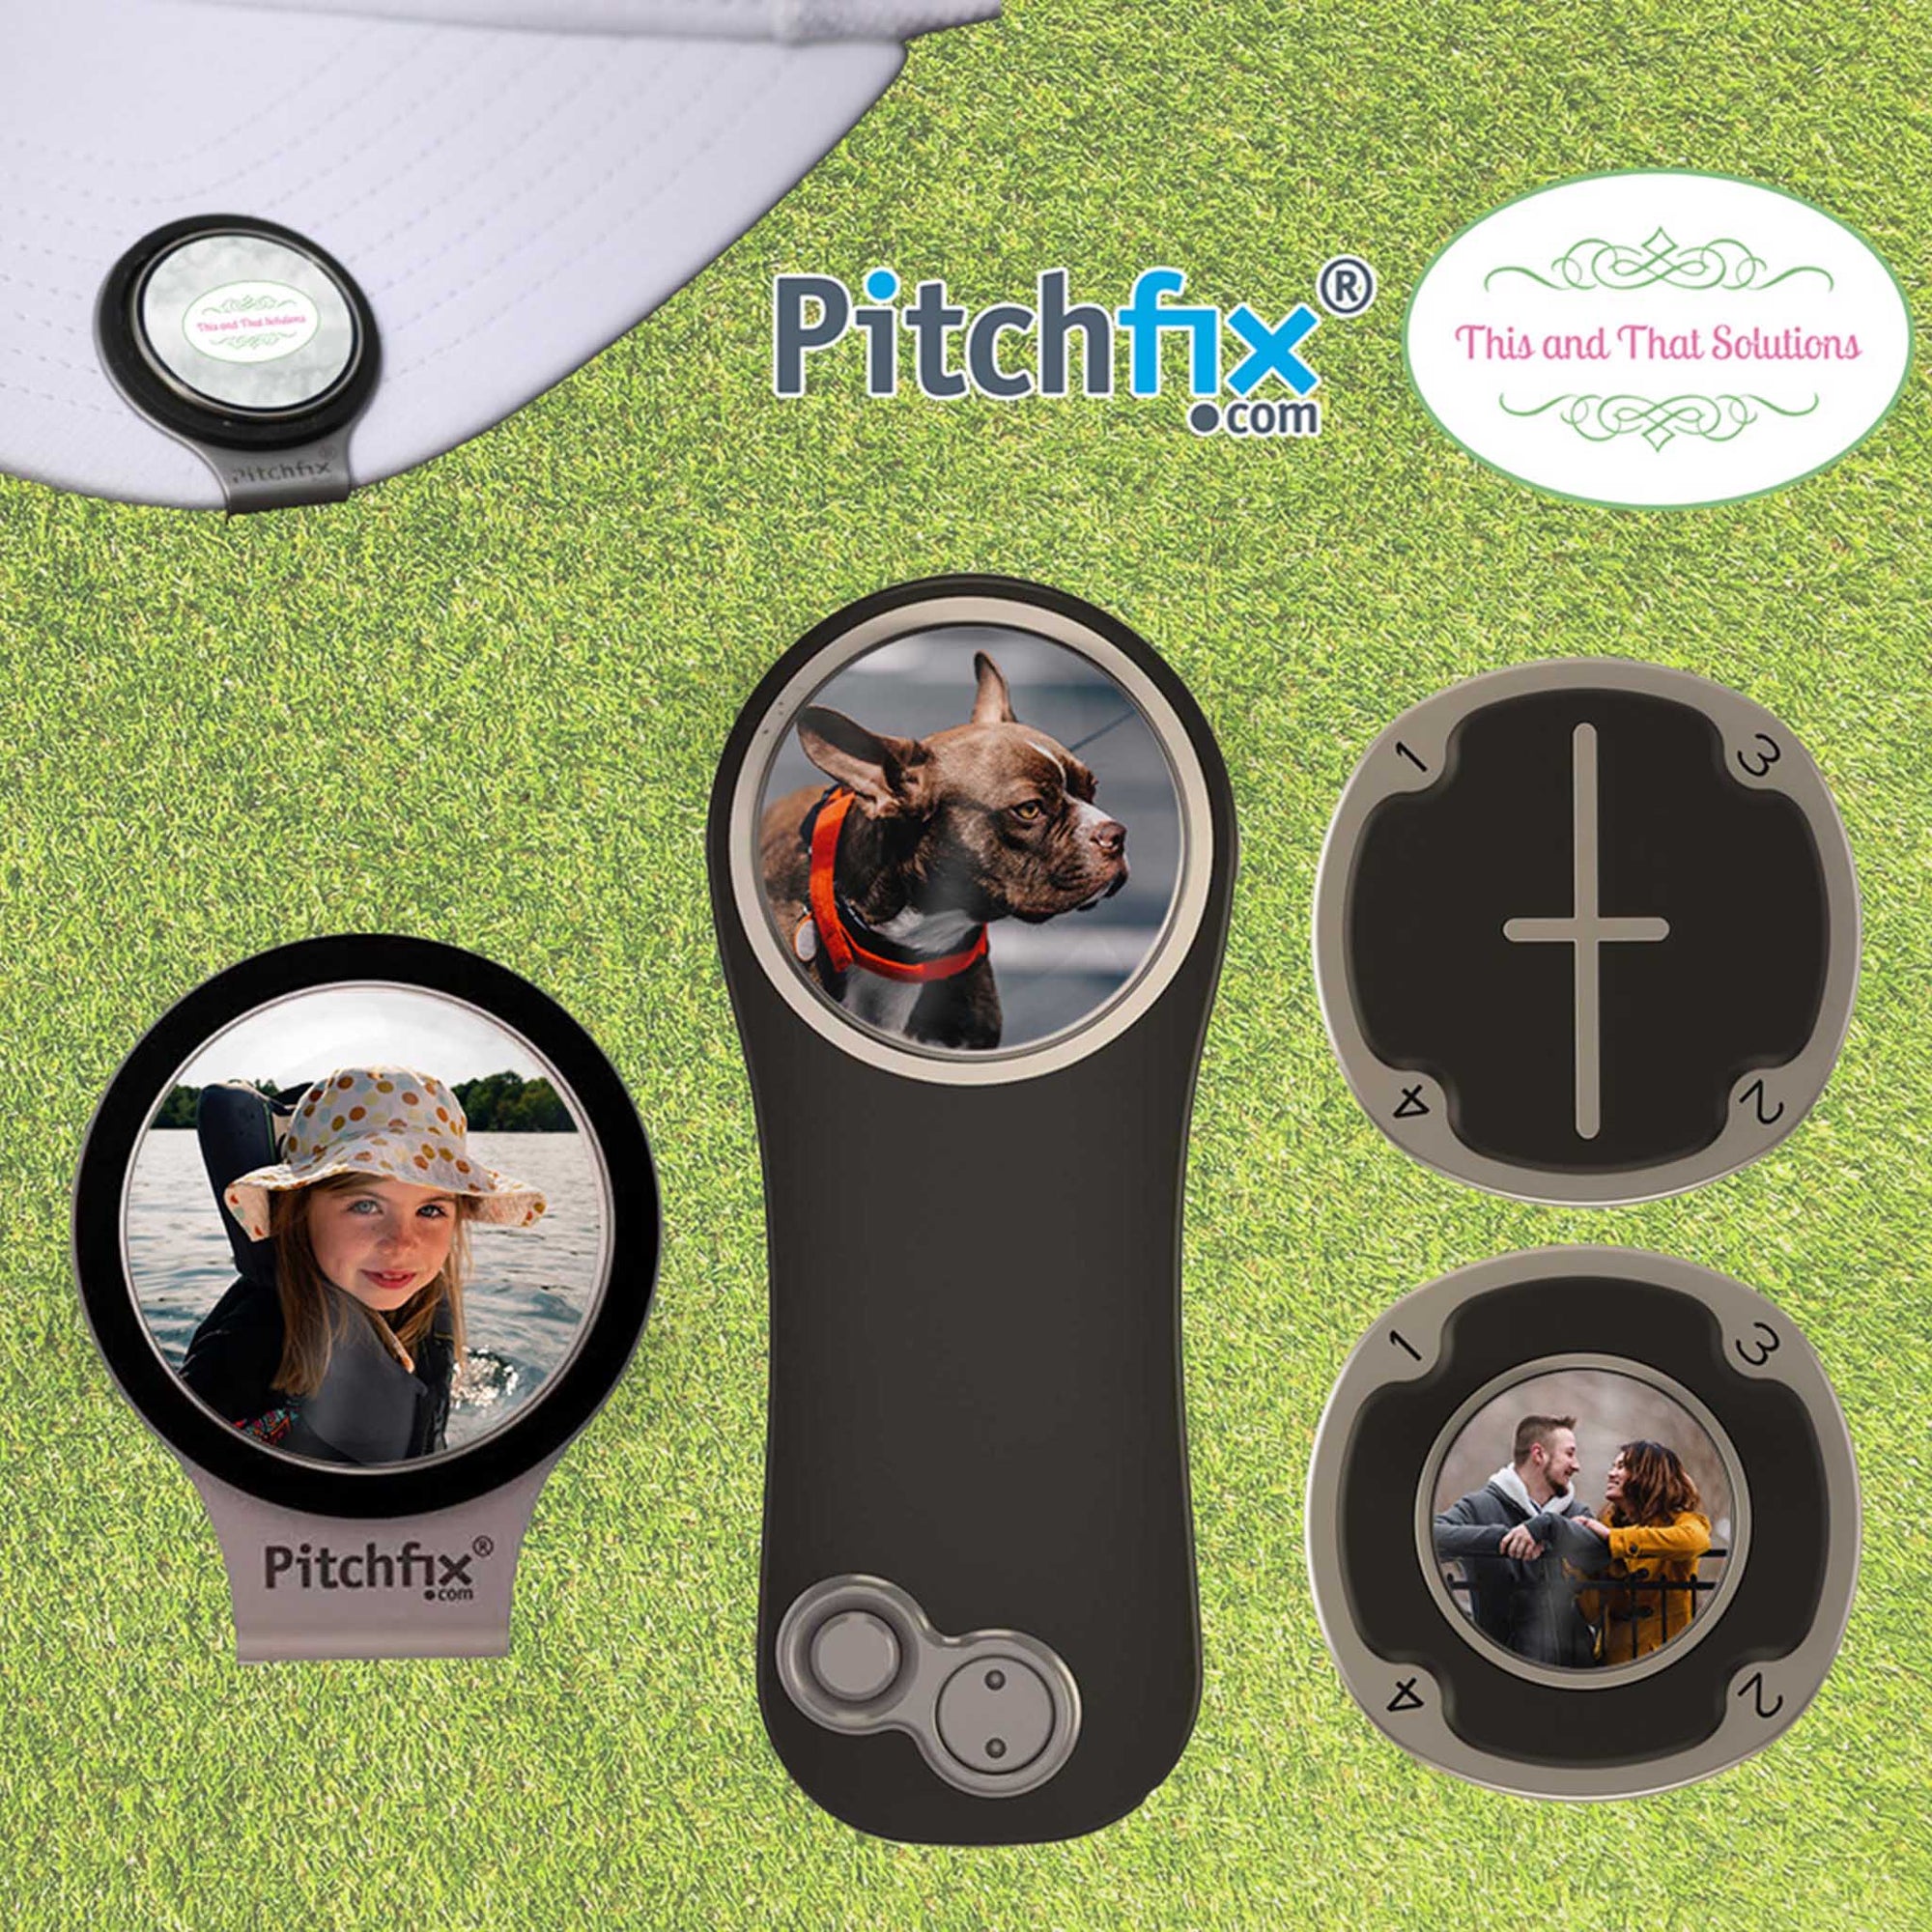 Golf - This & That Solutions - Personalized Gifts & Custom Home Decor